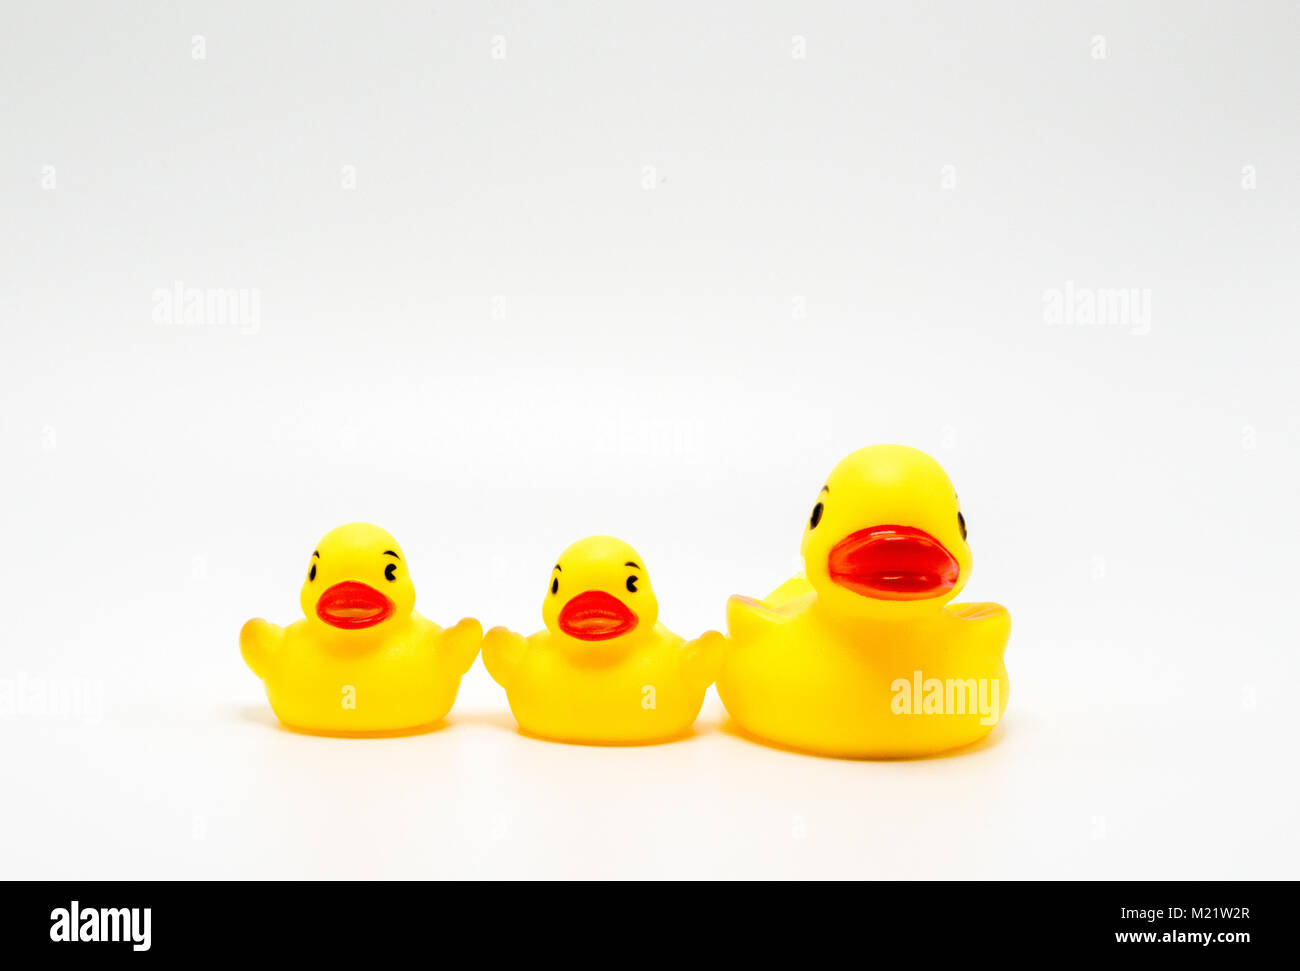 3 bright yellow rubber ducks in a row facing forward isolated on white Stock Photo